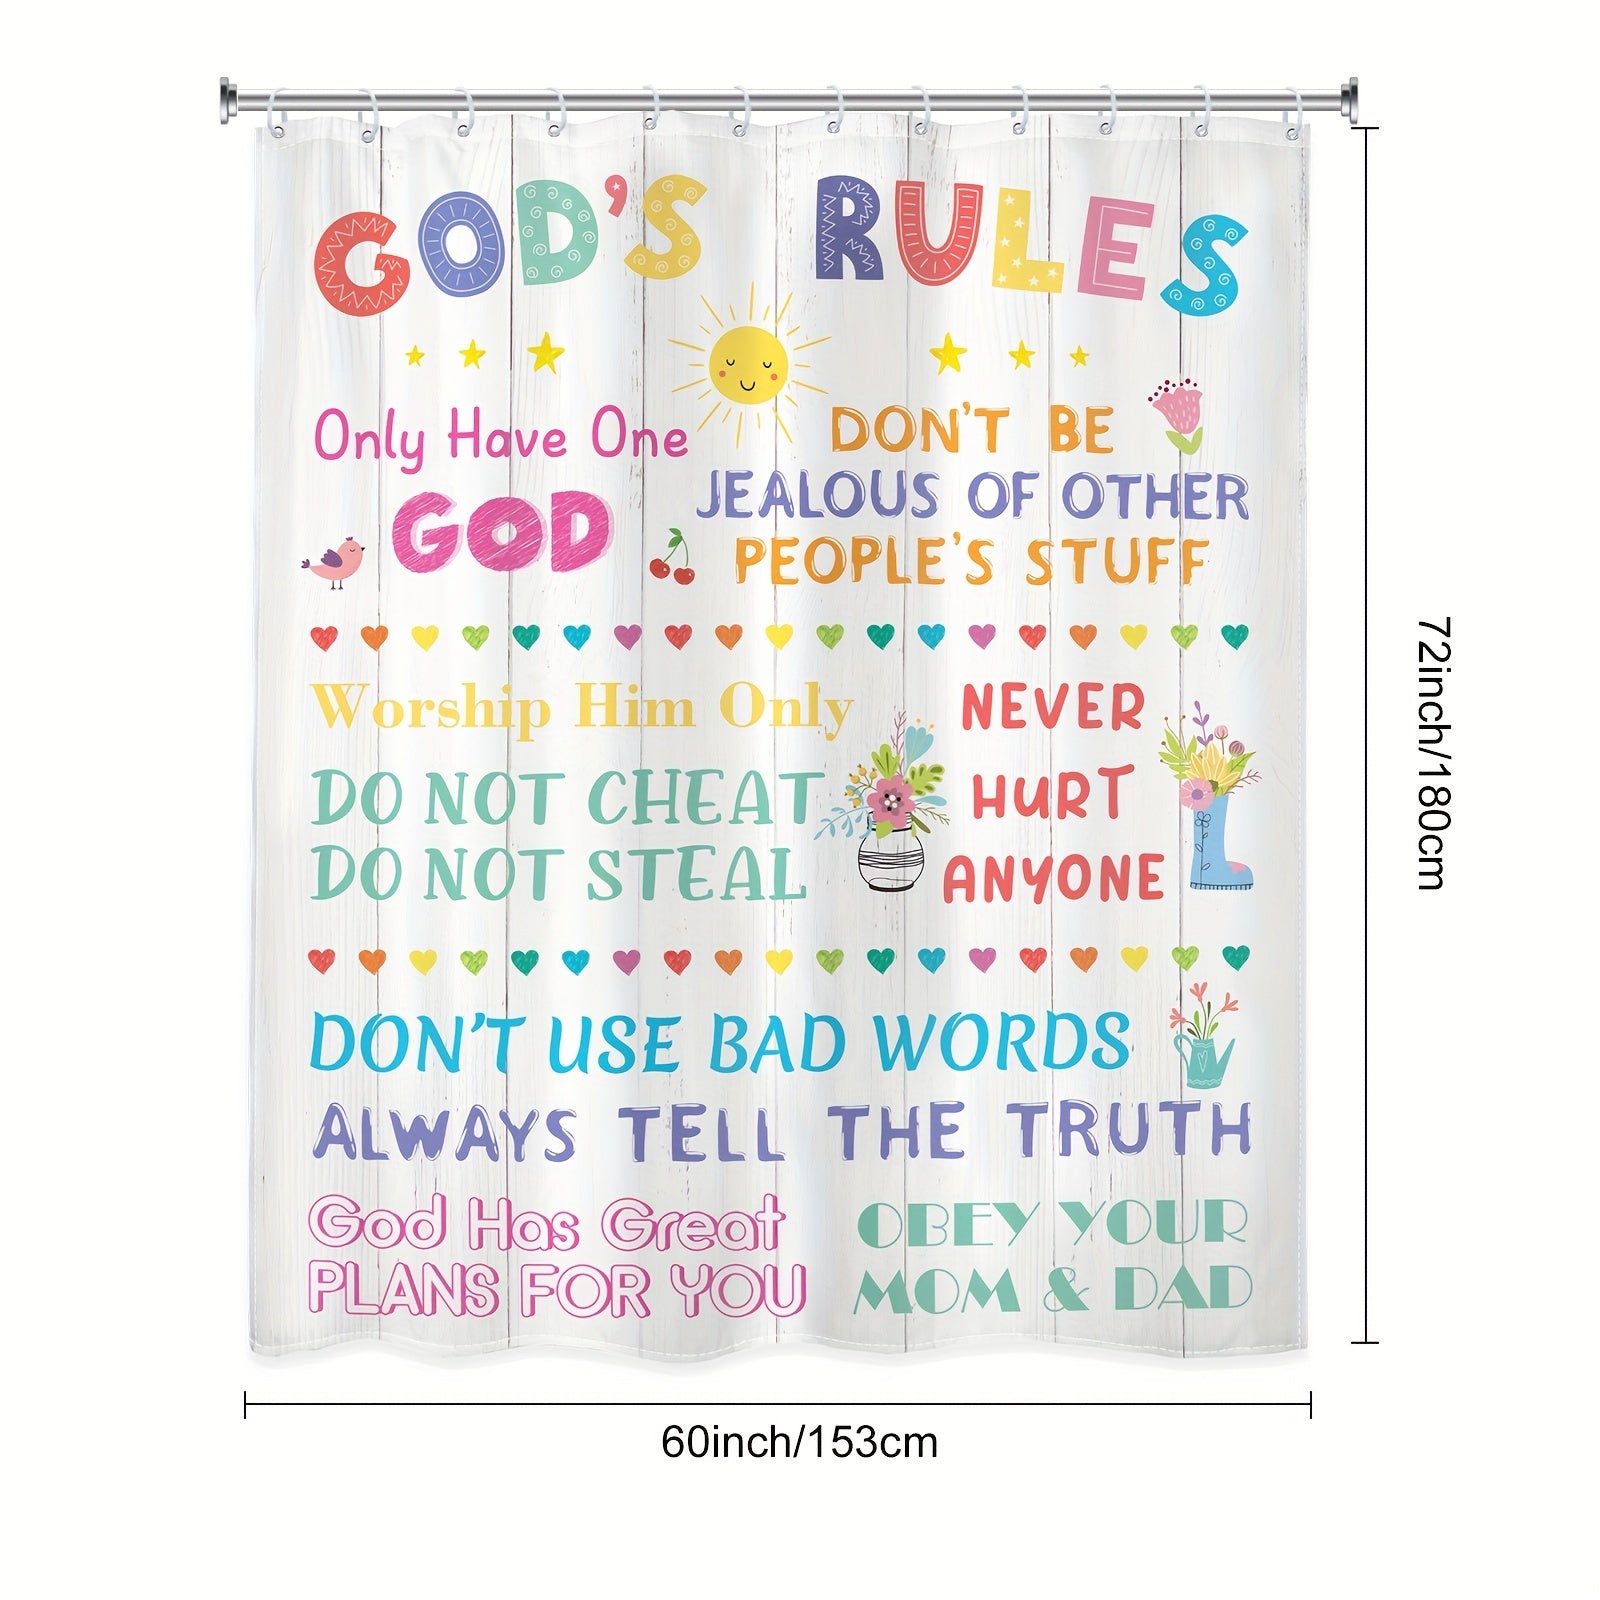 God's Rules (kids) Christian Shower Curtain With 12 Plastic Hooks, 60Wx72H Inch claimedbygoddesigns